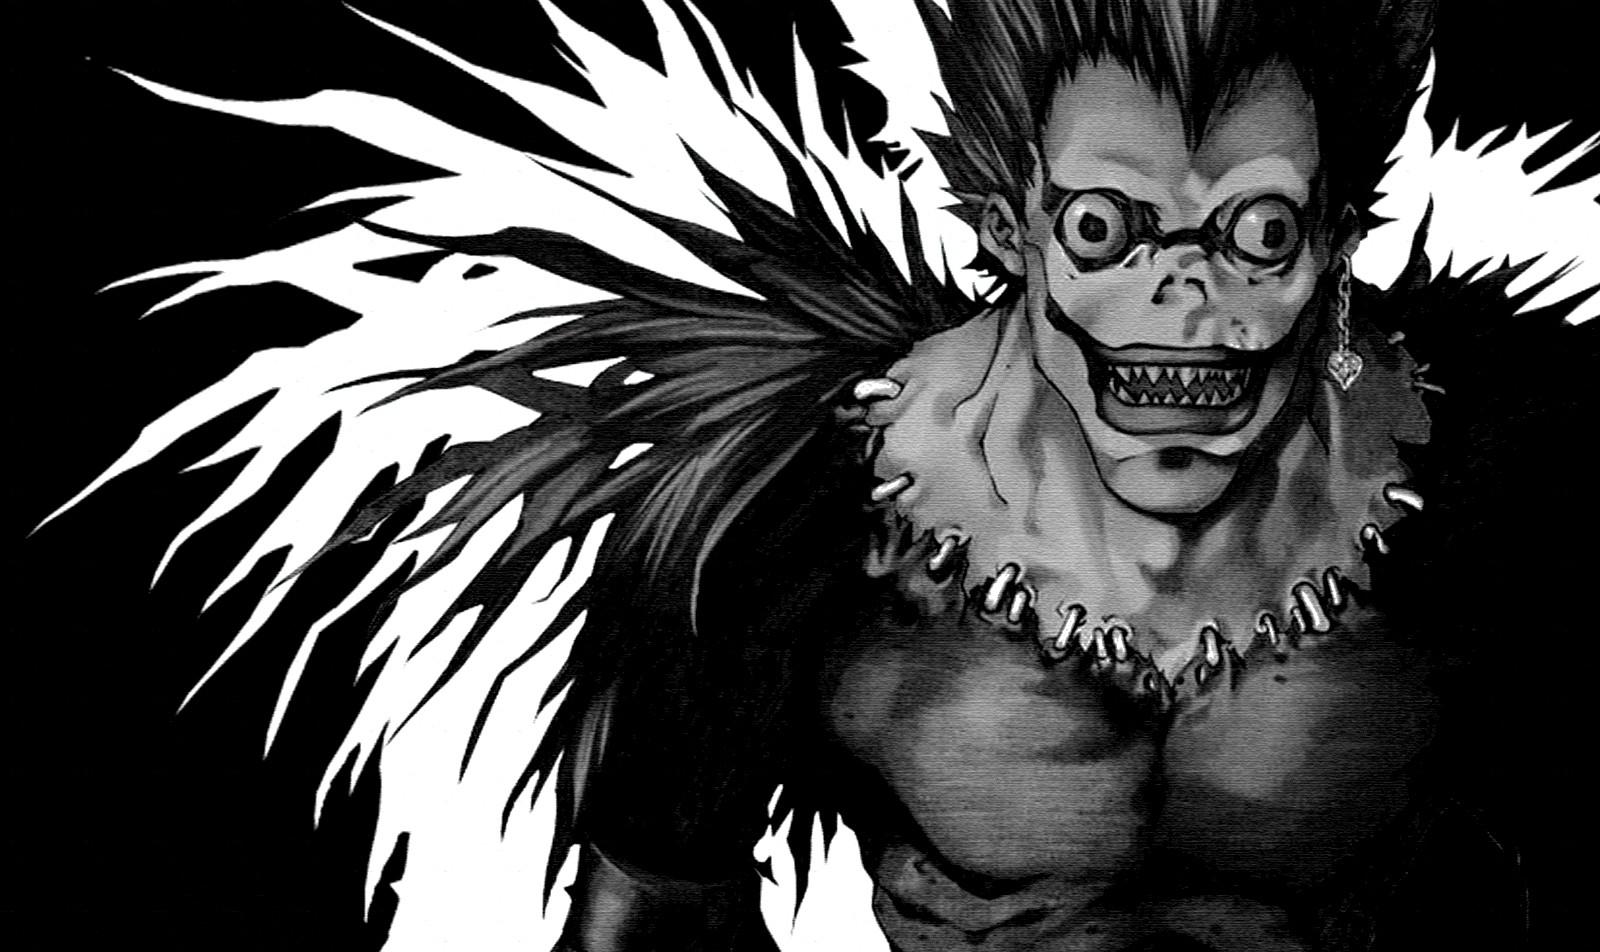 Ryuk In Death Note Wallpapers